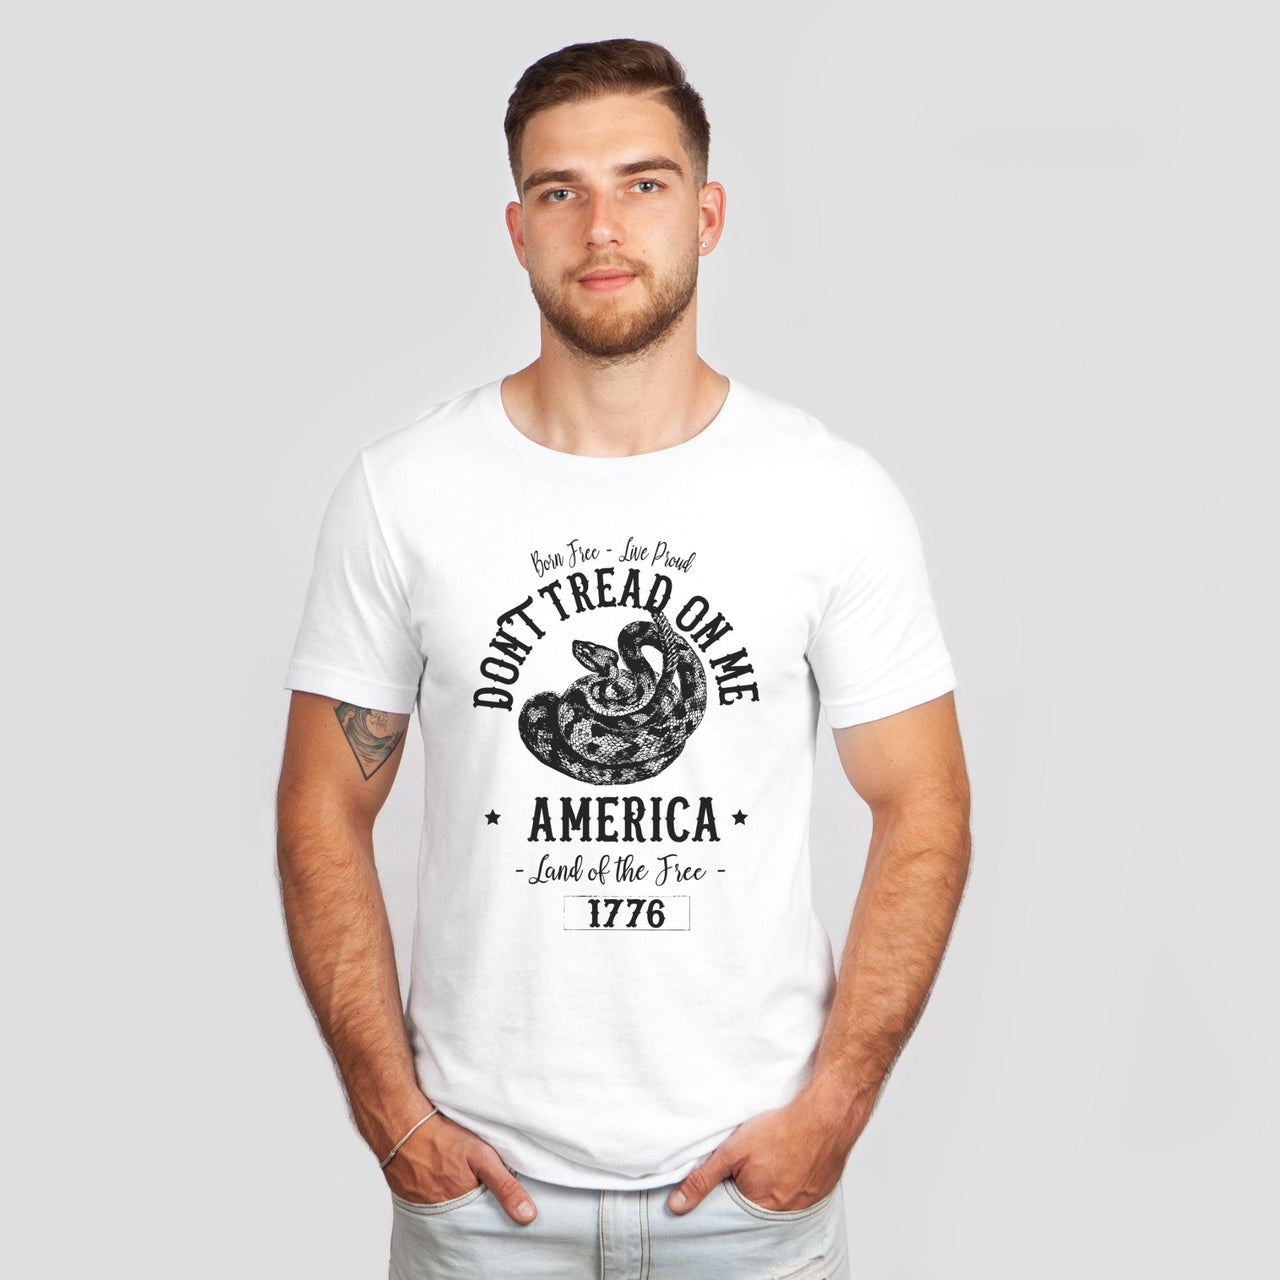 Land Of The Free Don't Tread On Me America Because Of the Brave 1776 Tee